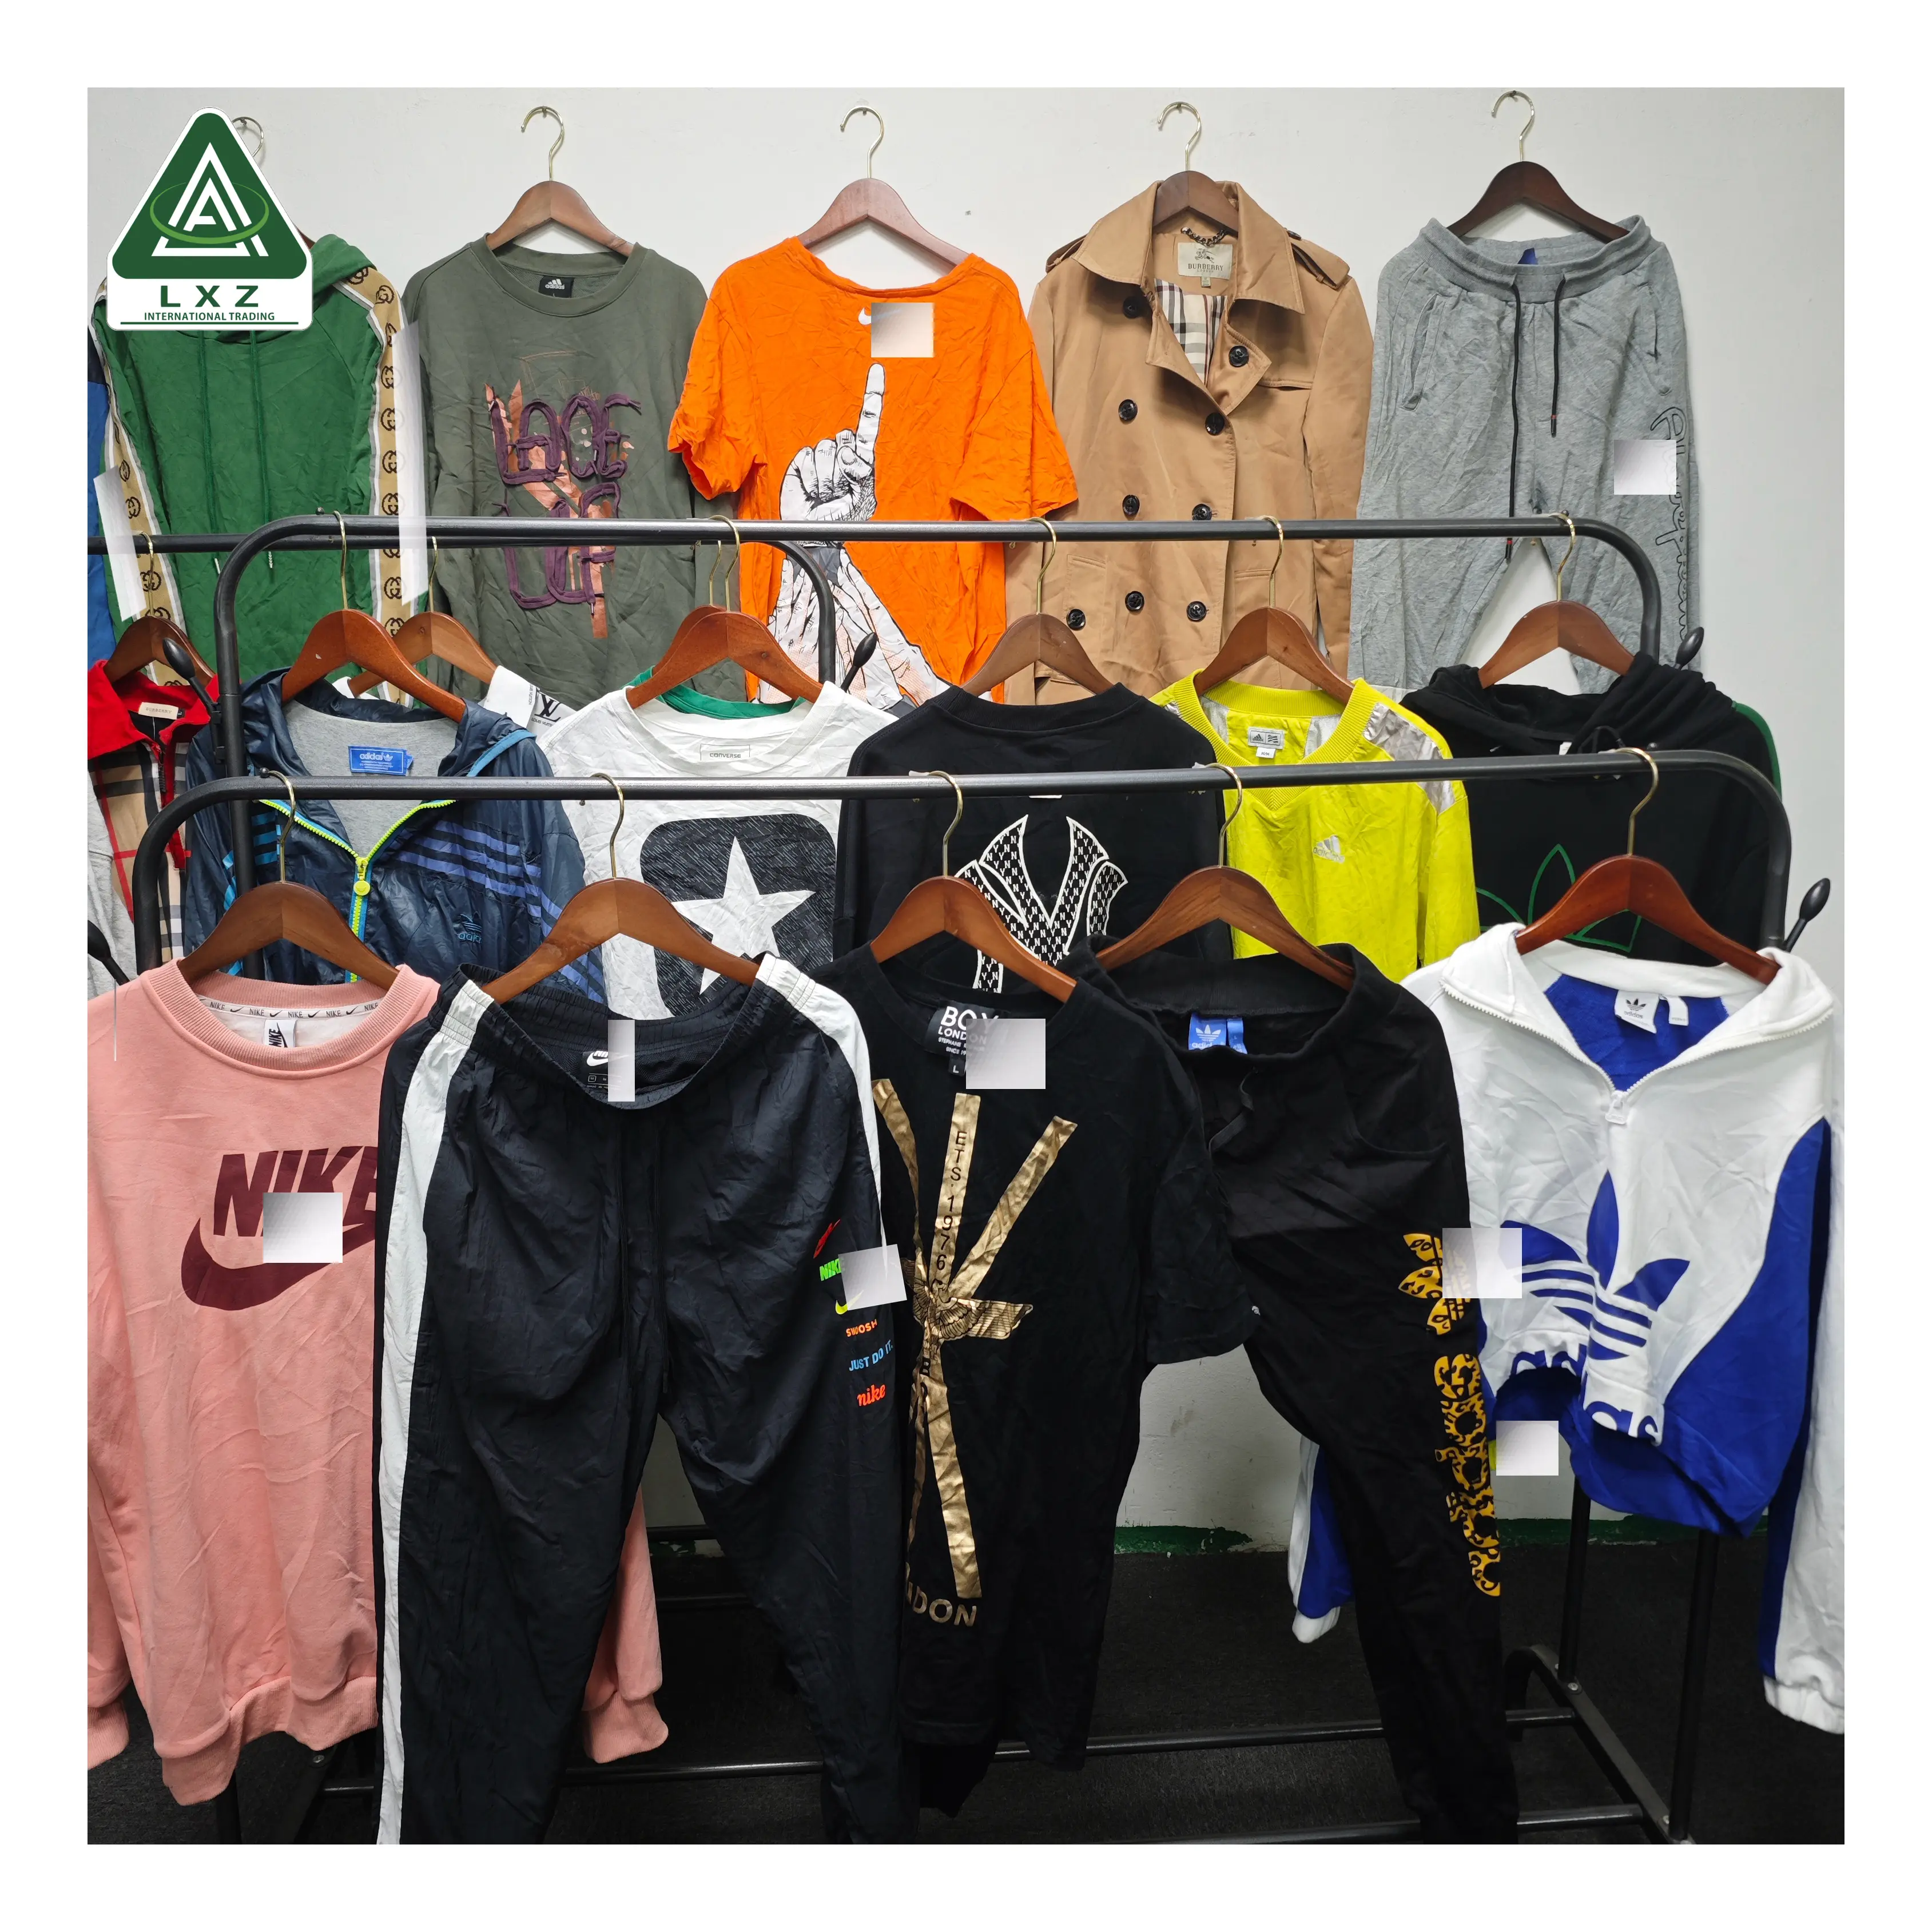 Used Mixed Branded Clothes Second Hand Coat For Men And Women Daily T-shirt Sport Pants Used Clothing Mixed Wholesale Cloth